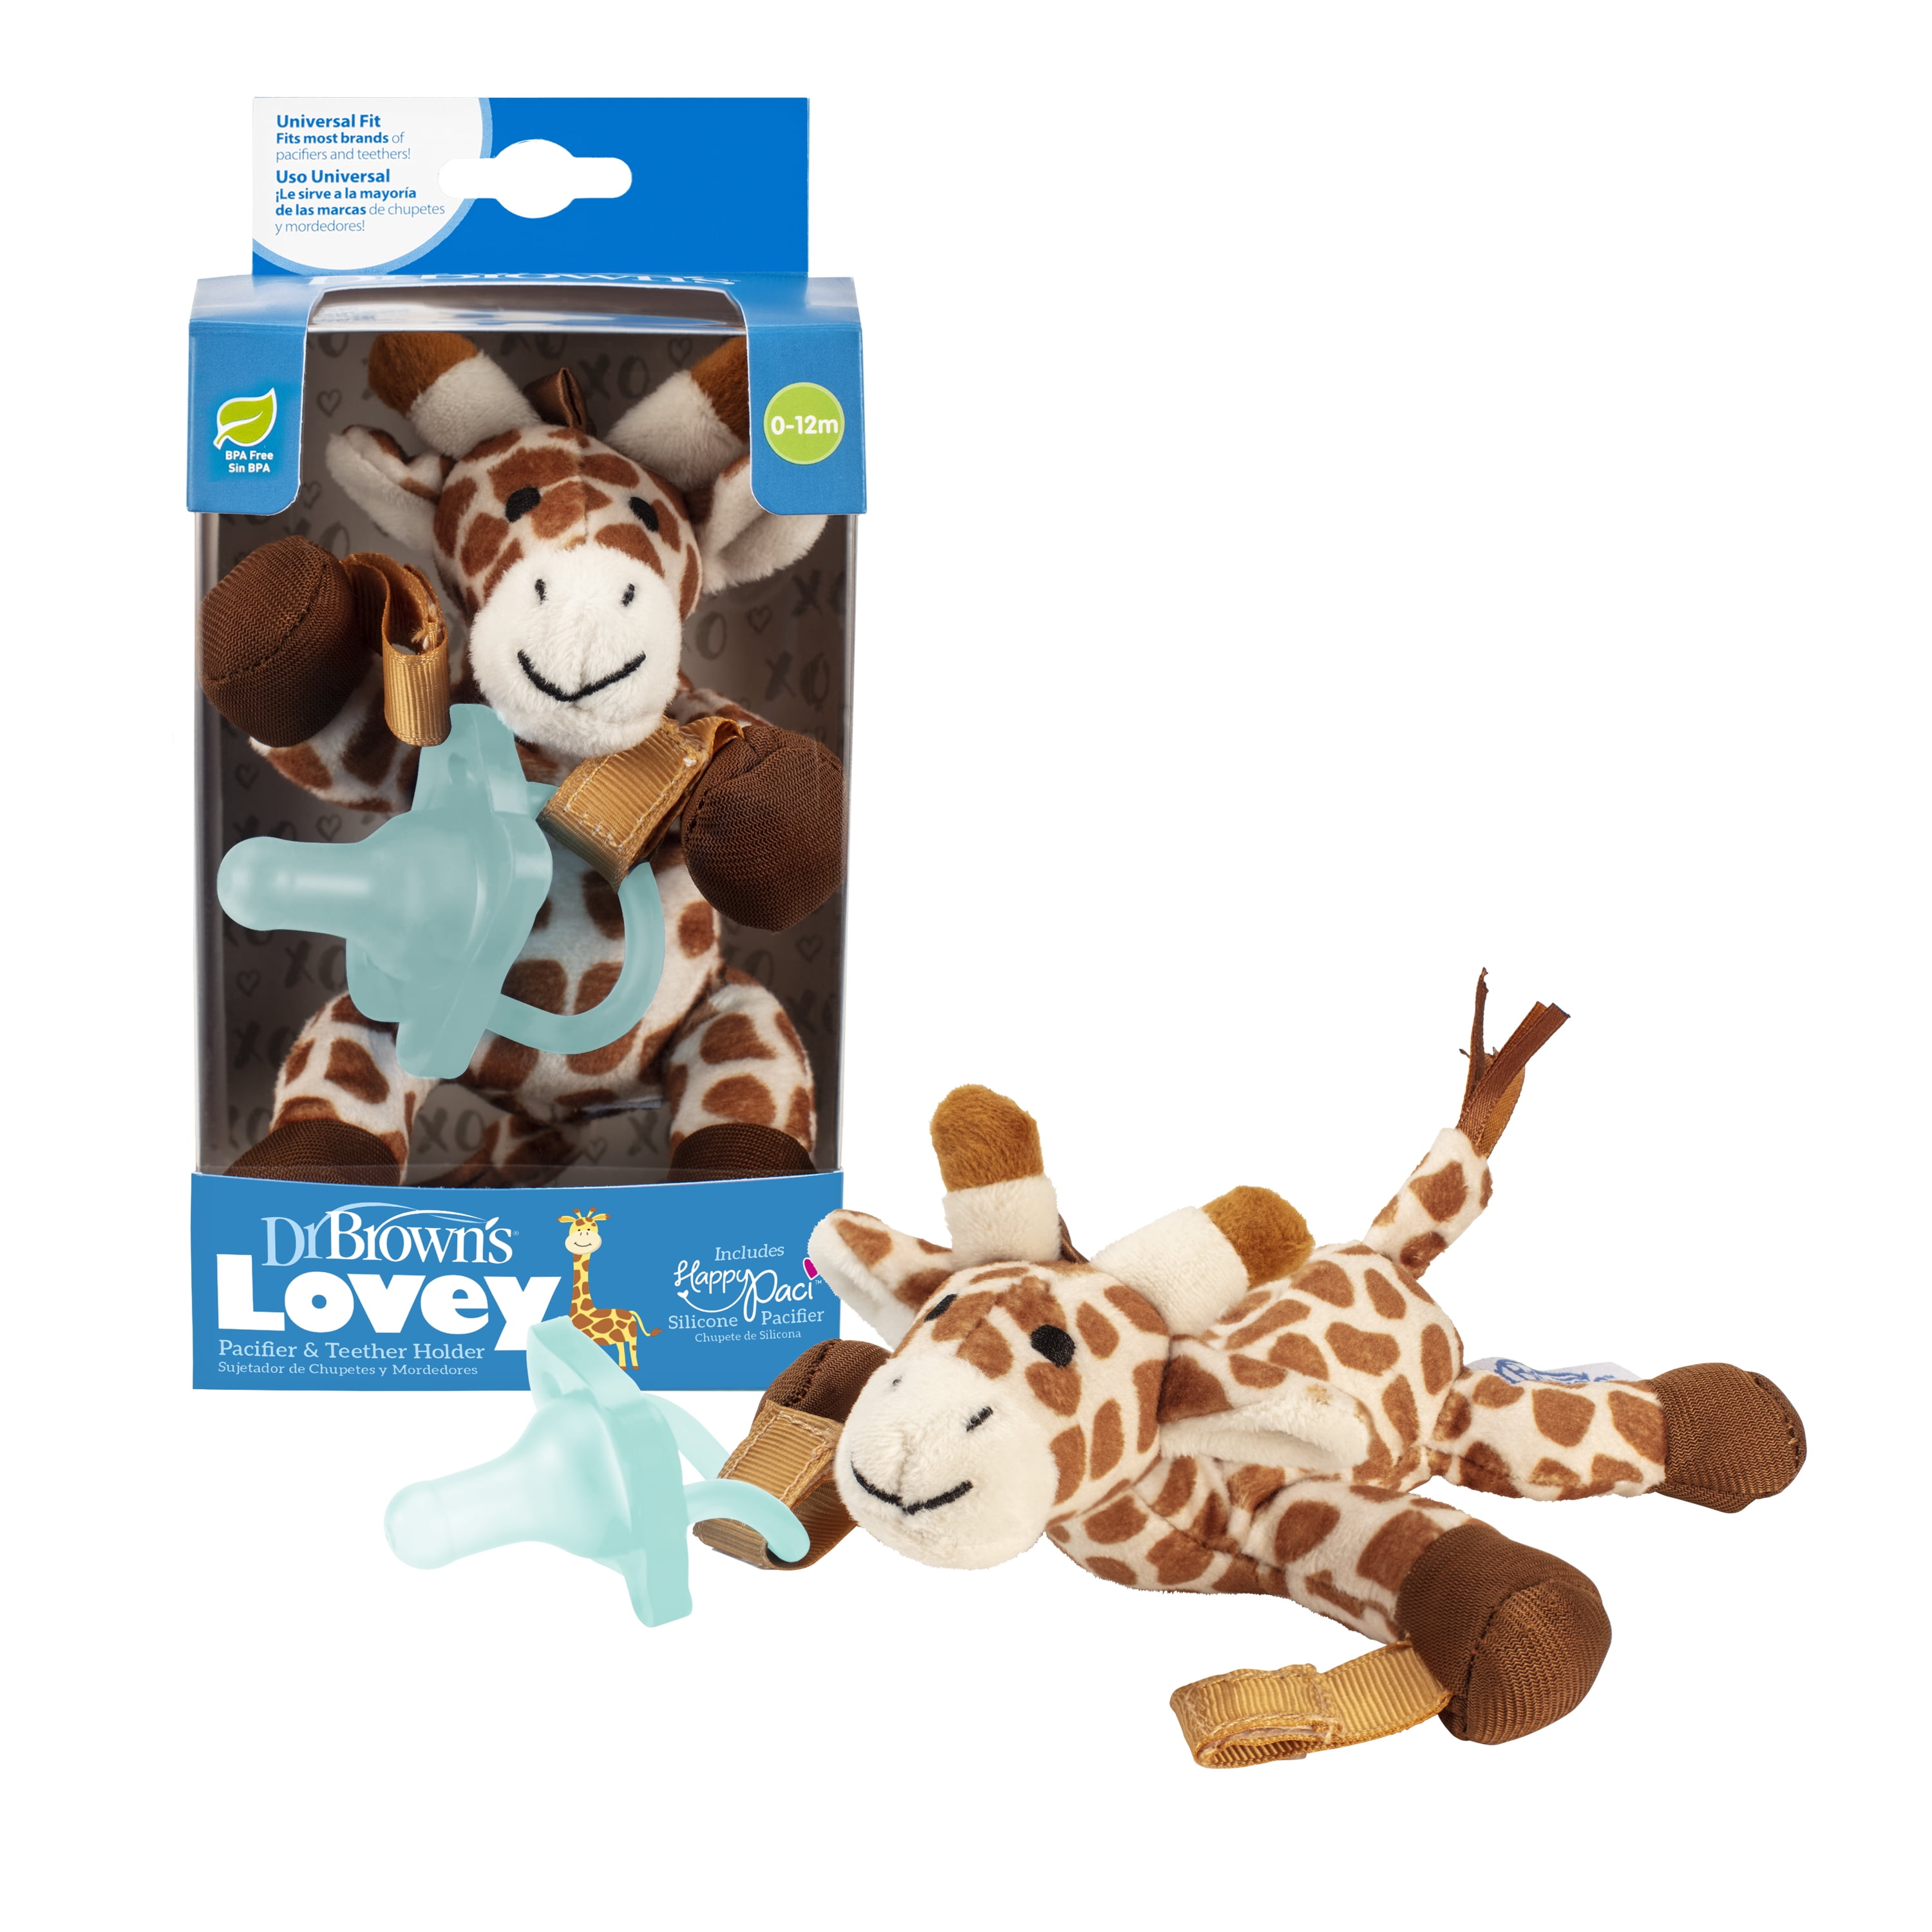 Dr. Brown’s Lovey Pacifier and Teether Holder with HappyPaci Silicone Baby Pacifier - Giraffe - 0-6m